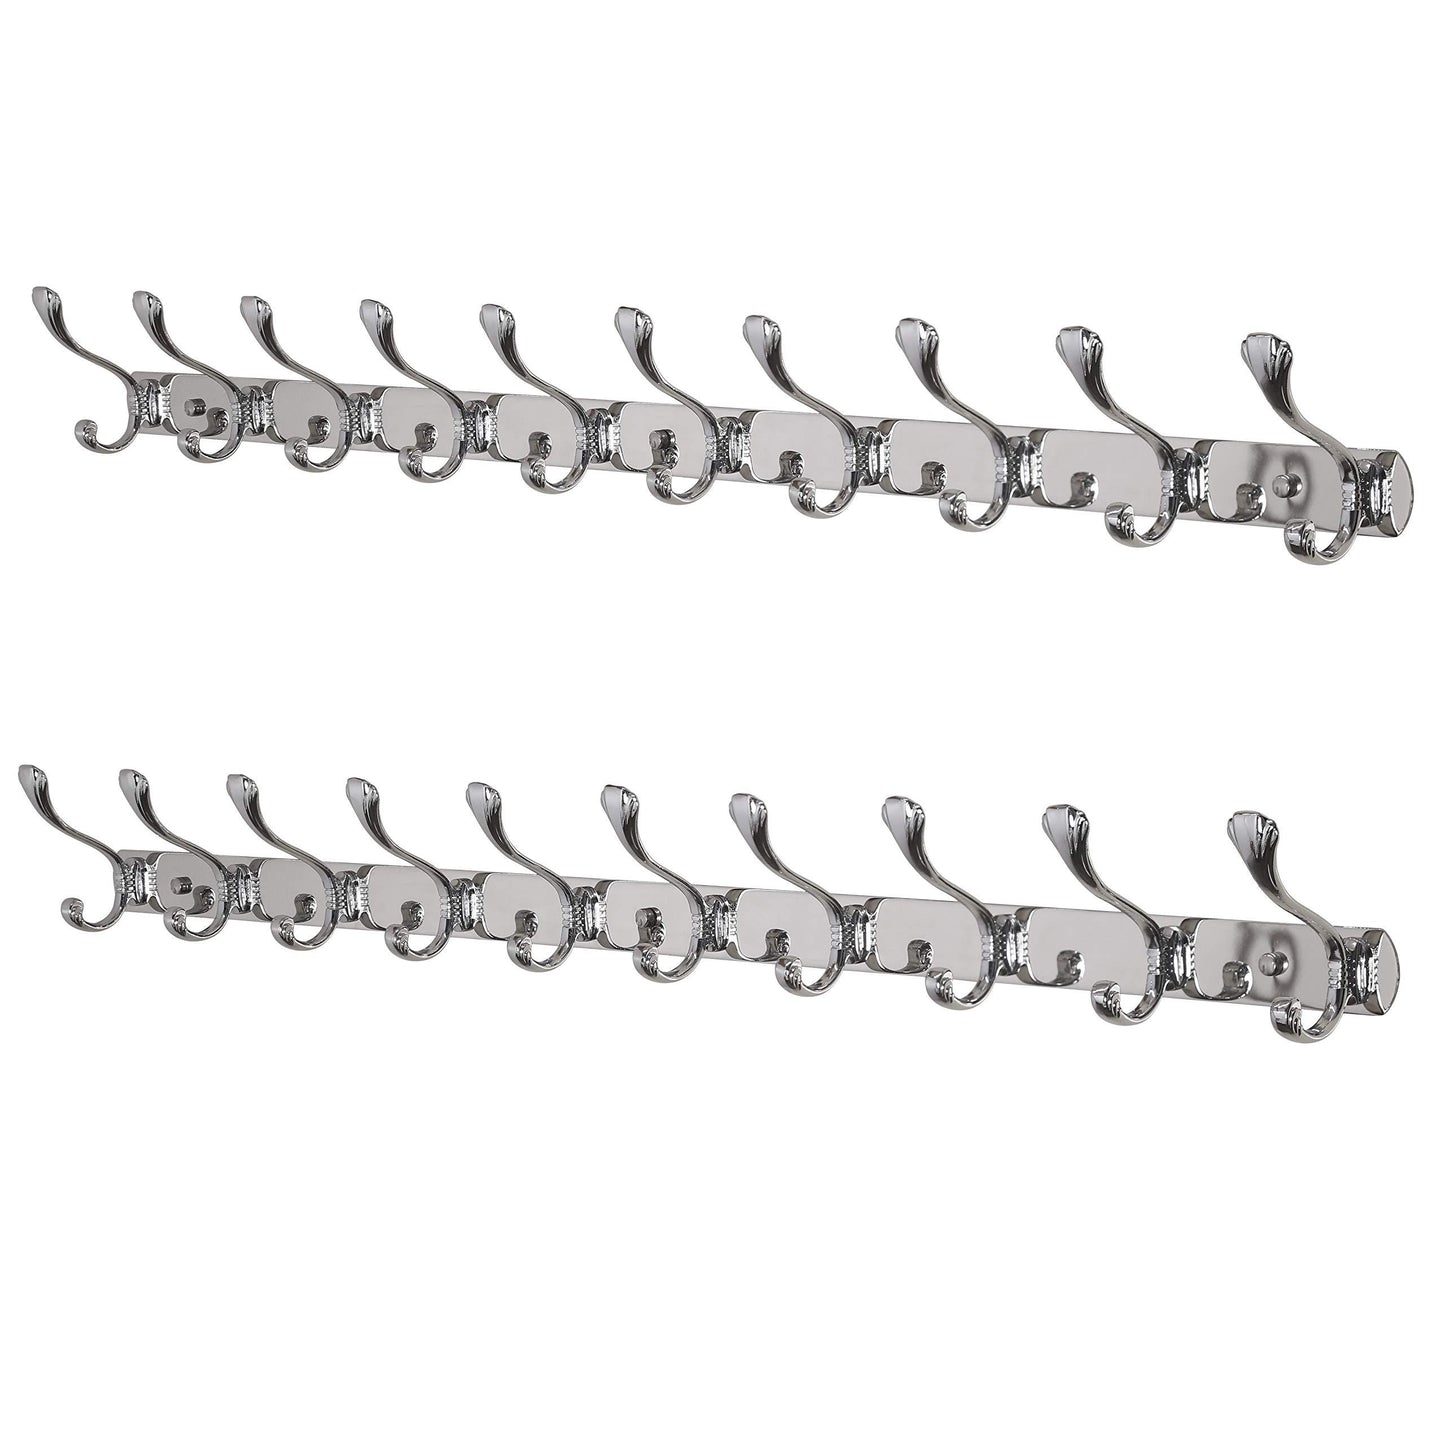 Dseap Wall Mounted Coat Rack Hook: 10-Hooks, 37-5/8” Long, 16” Hole to Hole, Heavy Duty, Stainless Steel, for Coat Hat Towel Robes Mudroom Bathroom Entryway (Seashell, Chromed, 2 Packs)